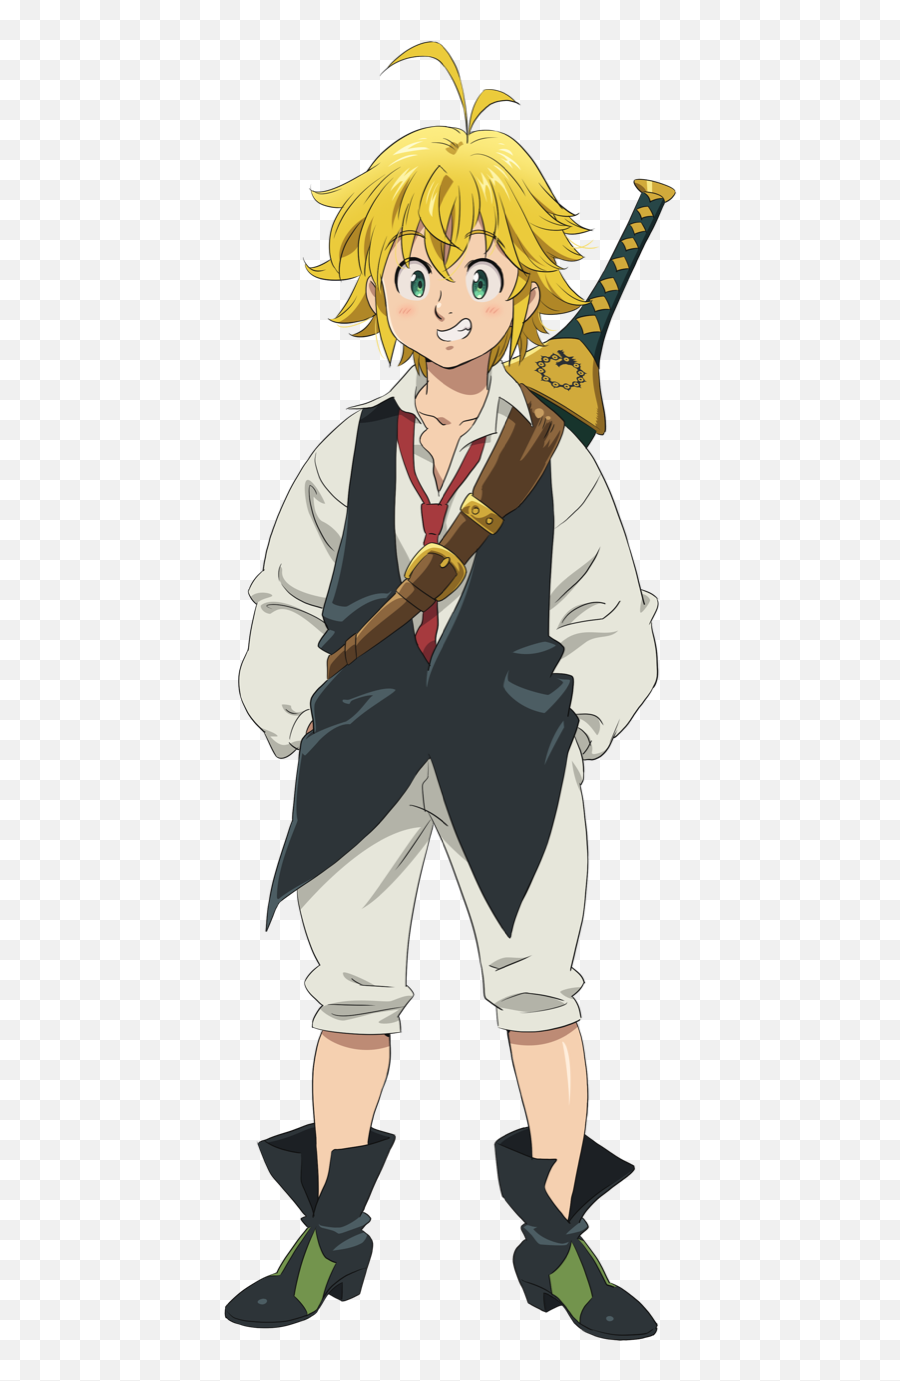 Sir Meliodas Wallpapers - Wrath Anime 7 Deadly Sin Png,Icon Of Sin Wallpaper